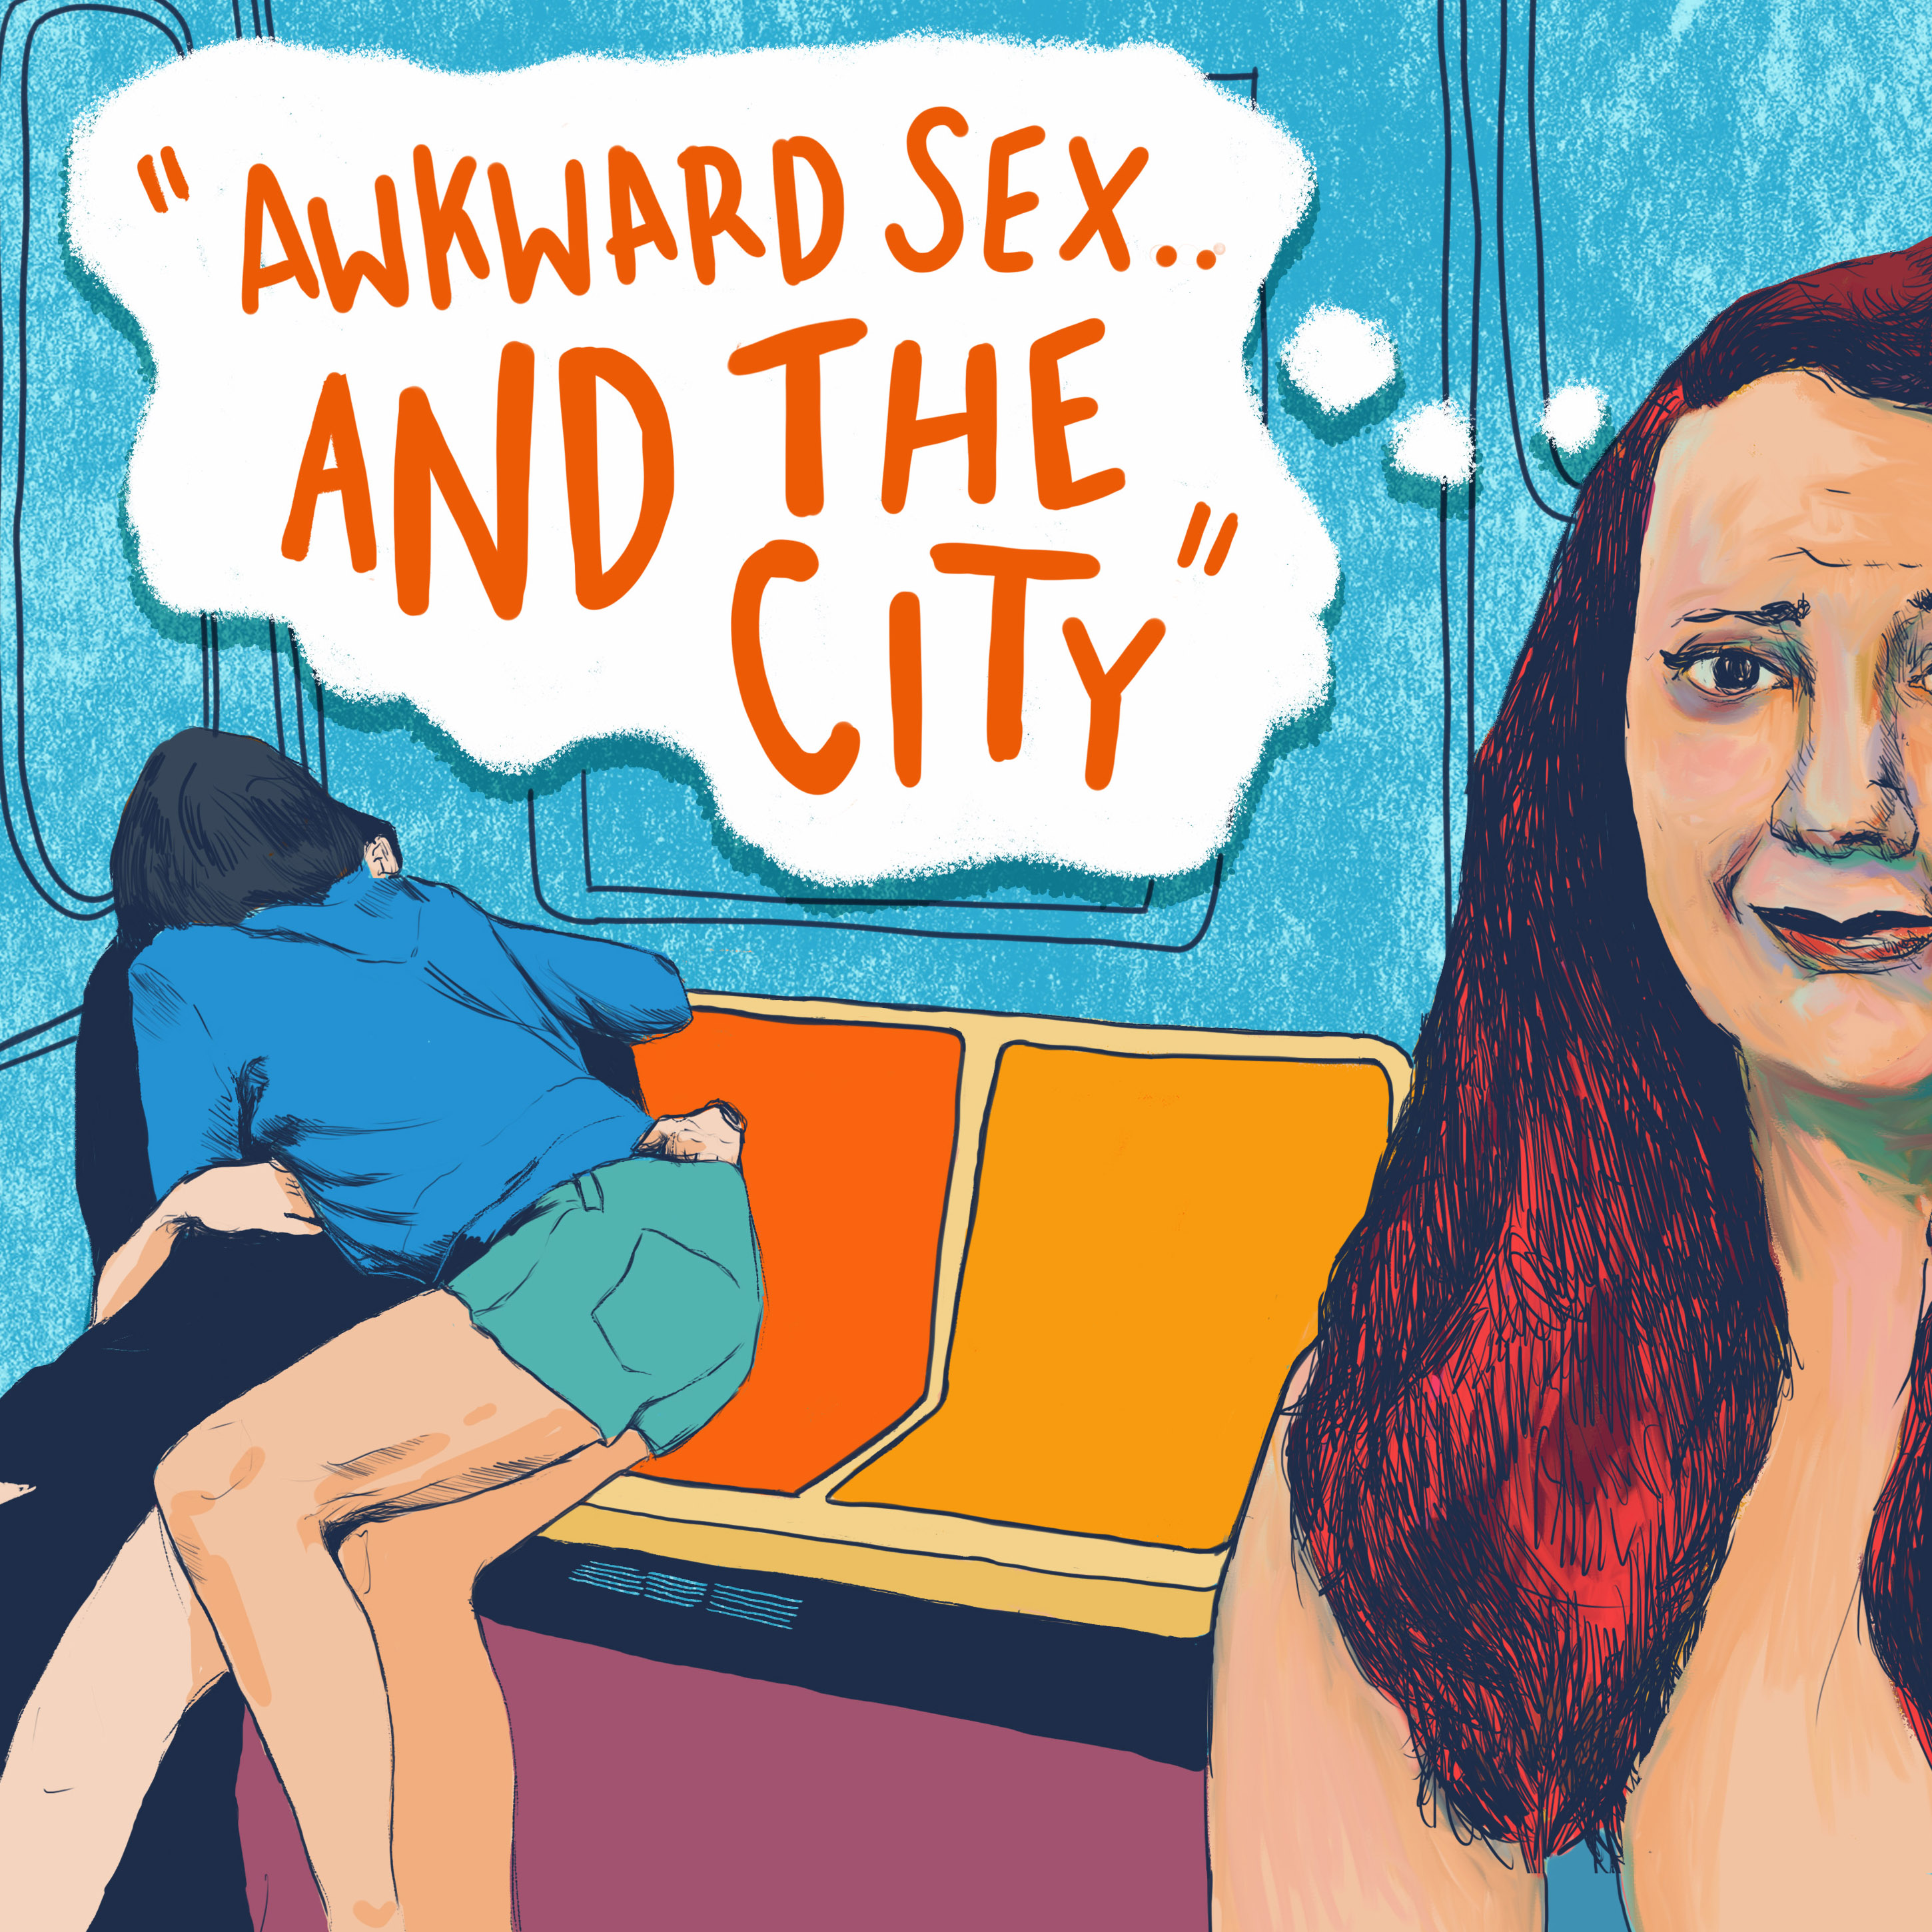 Awkward Sex And The City with Natalie Wall pic